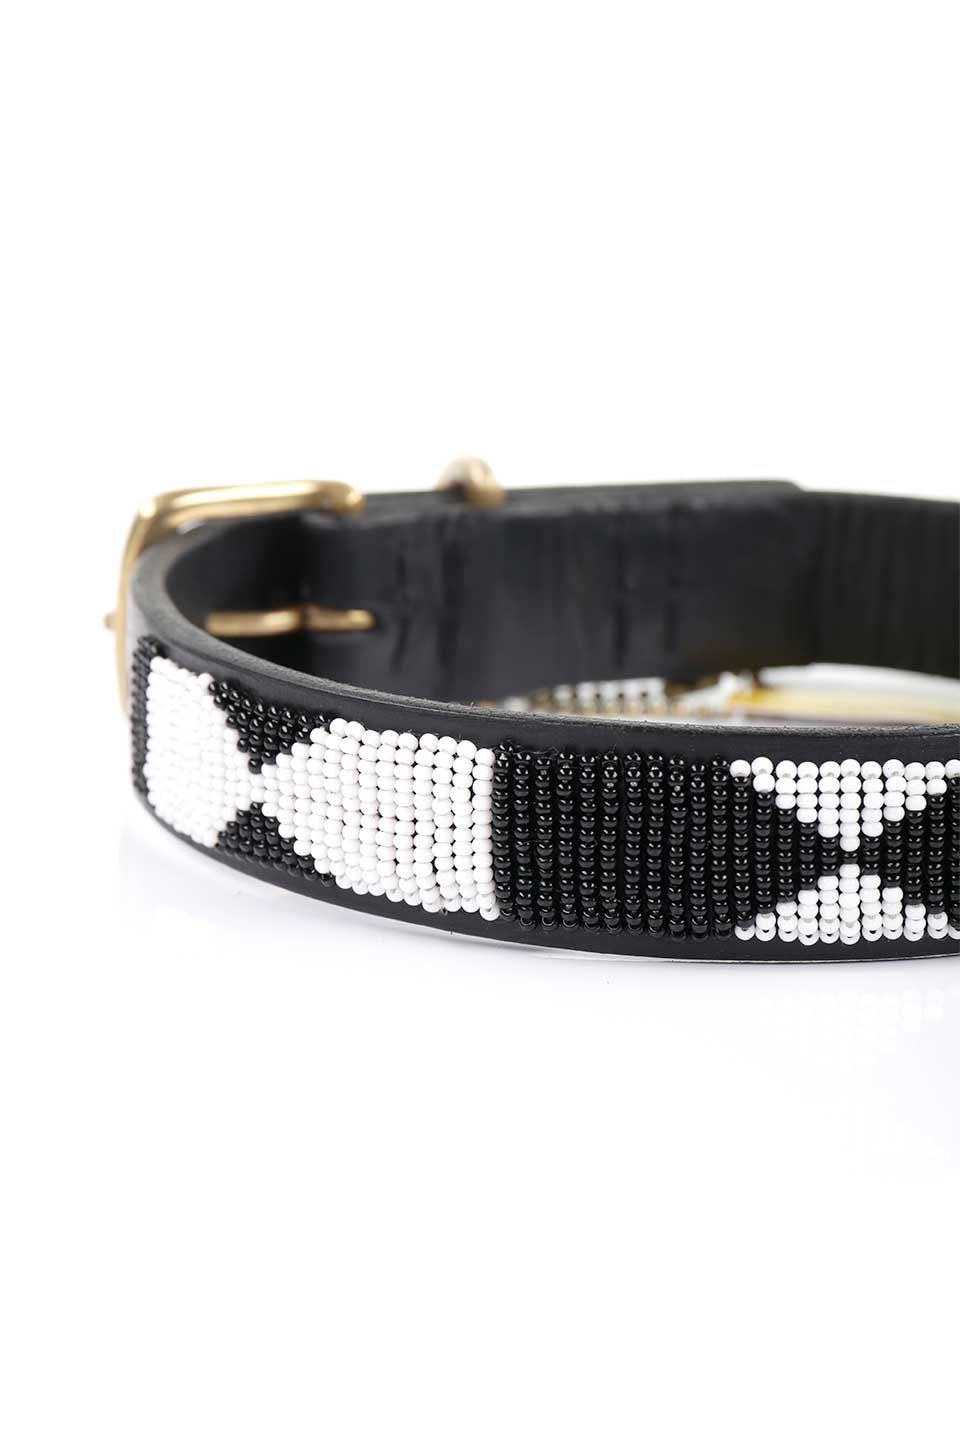 Evony&Ivory Beaded Dog Collar 16" エボニー＆アイボリー・ビーズドッグカラー / by THE KENYAN COLLECTION